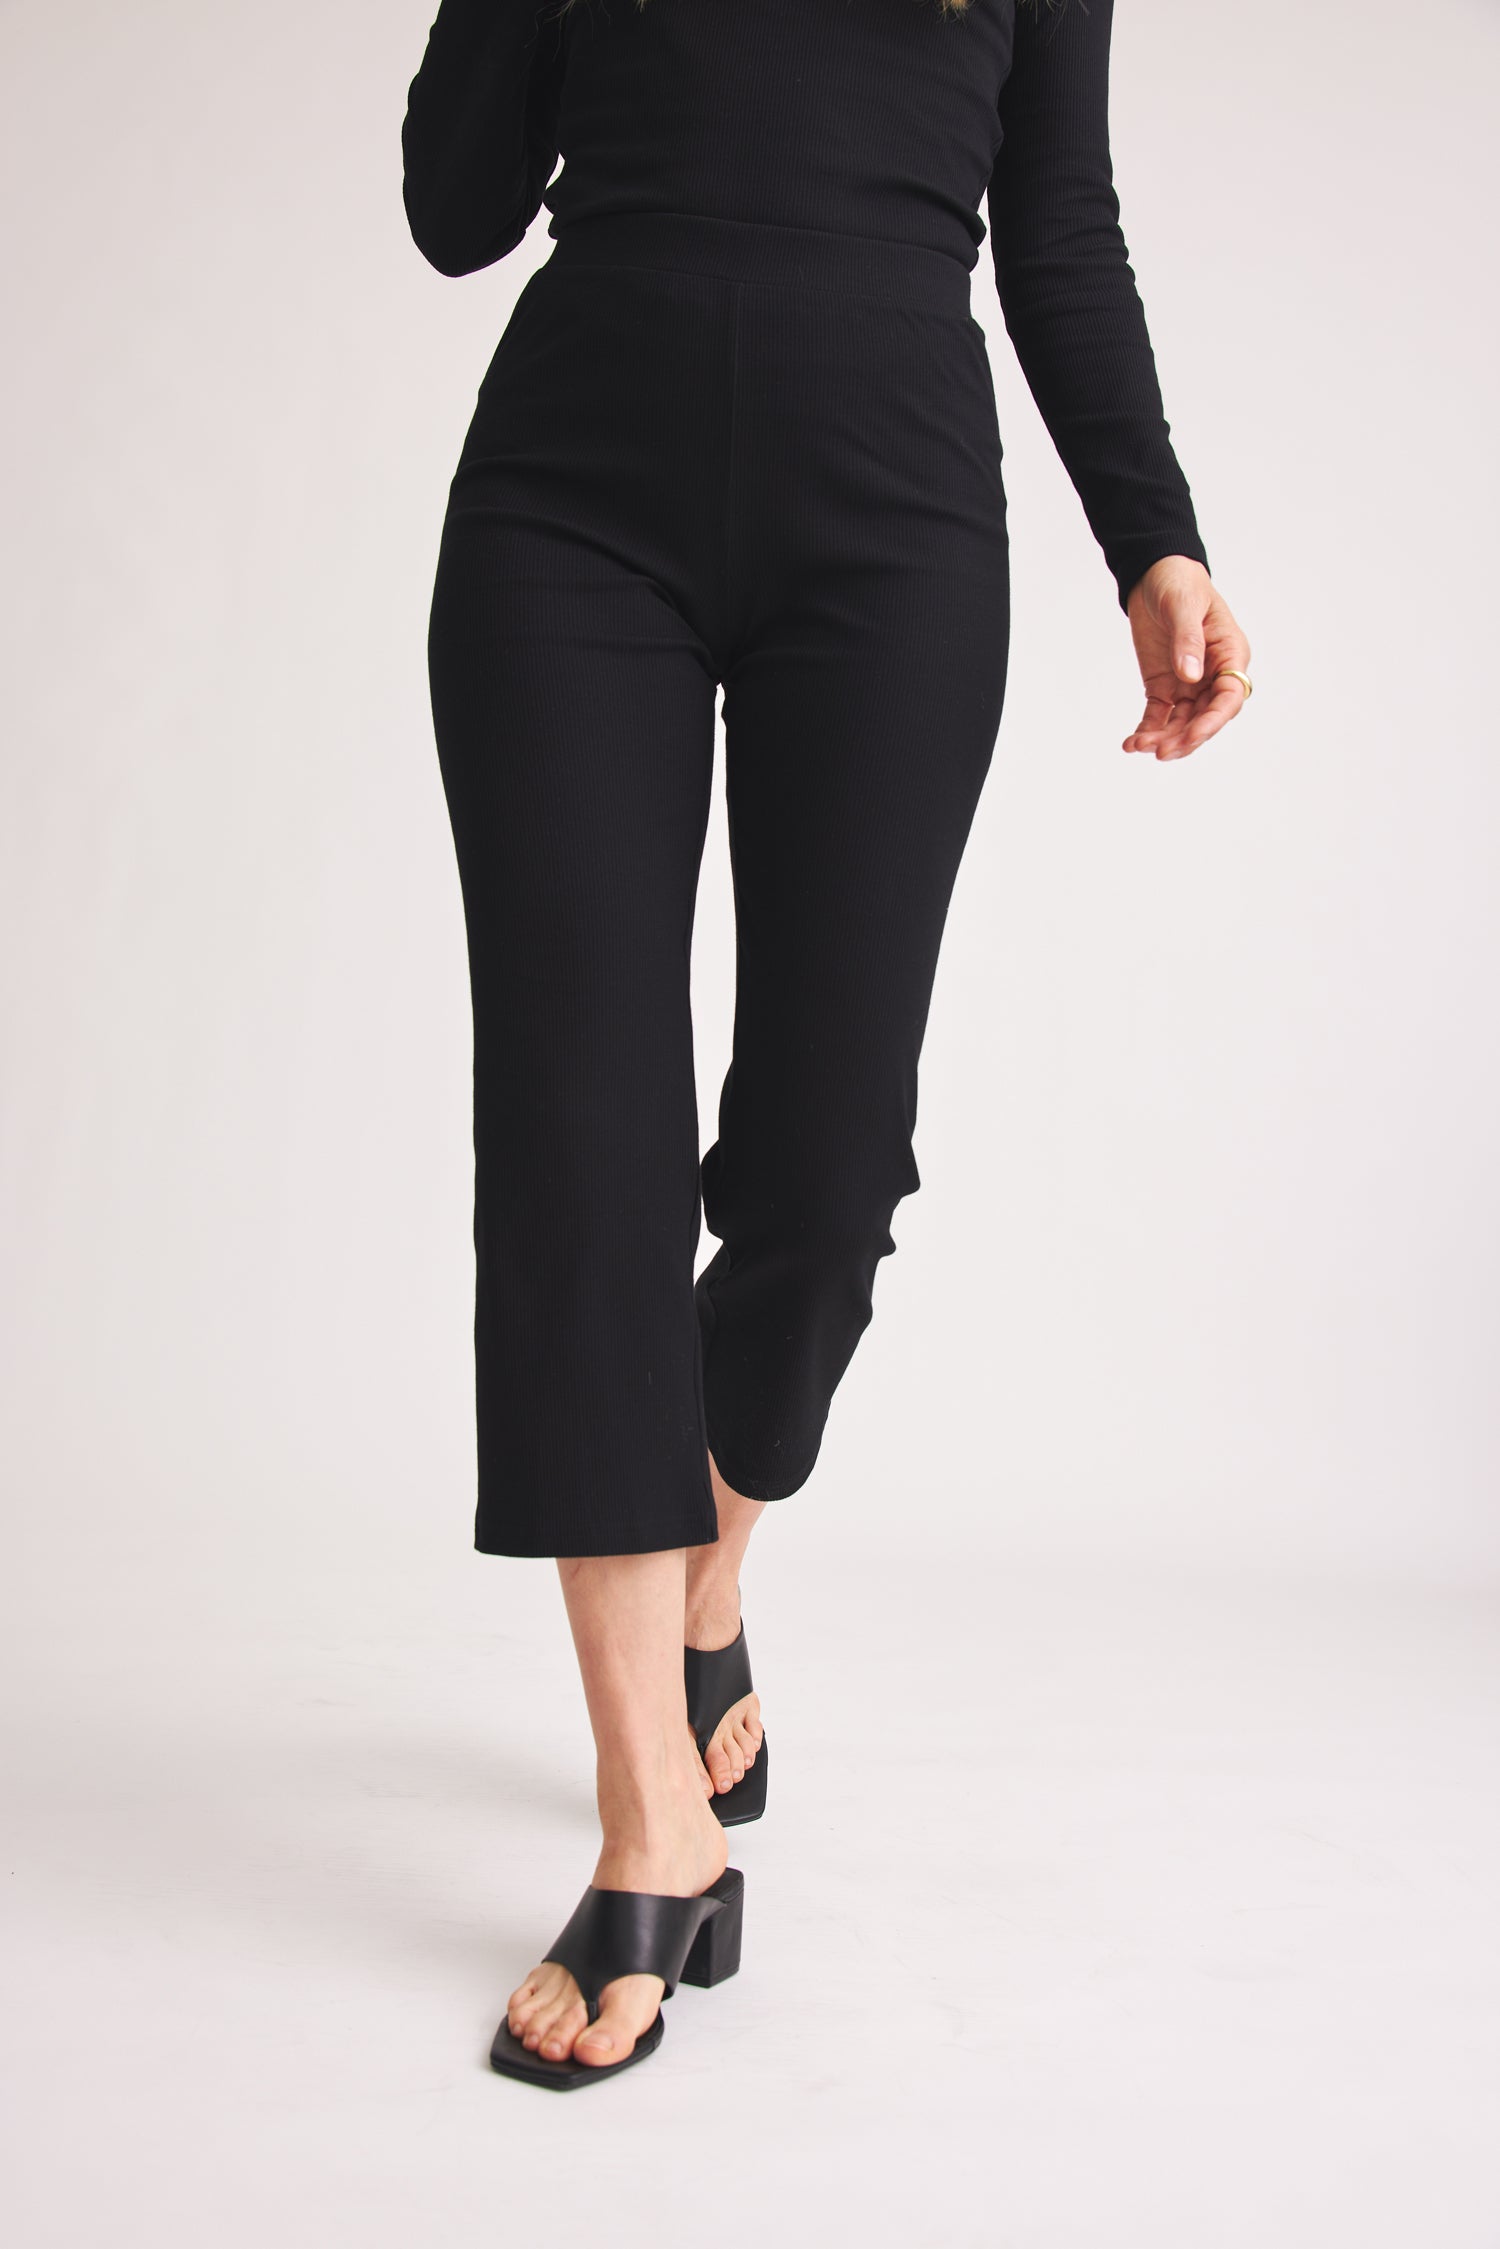 Black 3/4 pants Bree made of organic cotton by Baige the Label